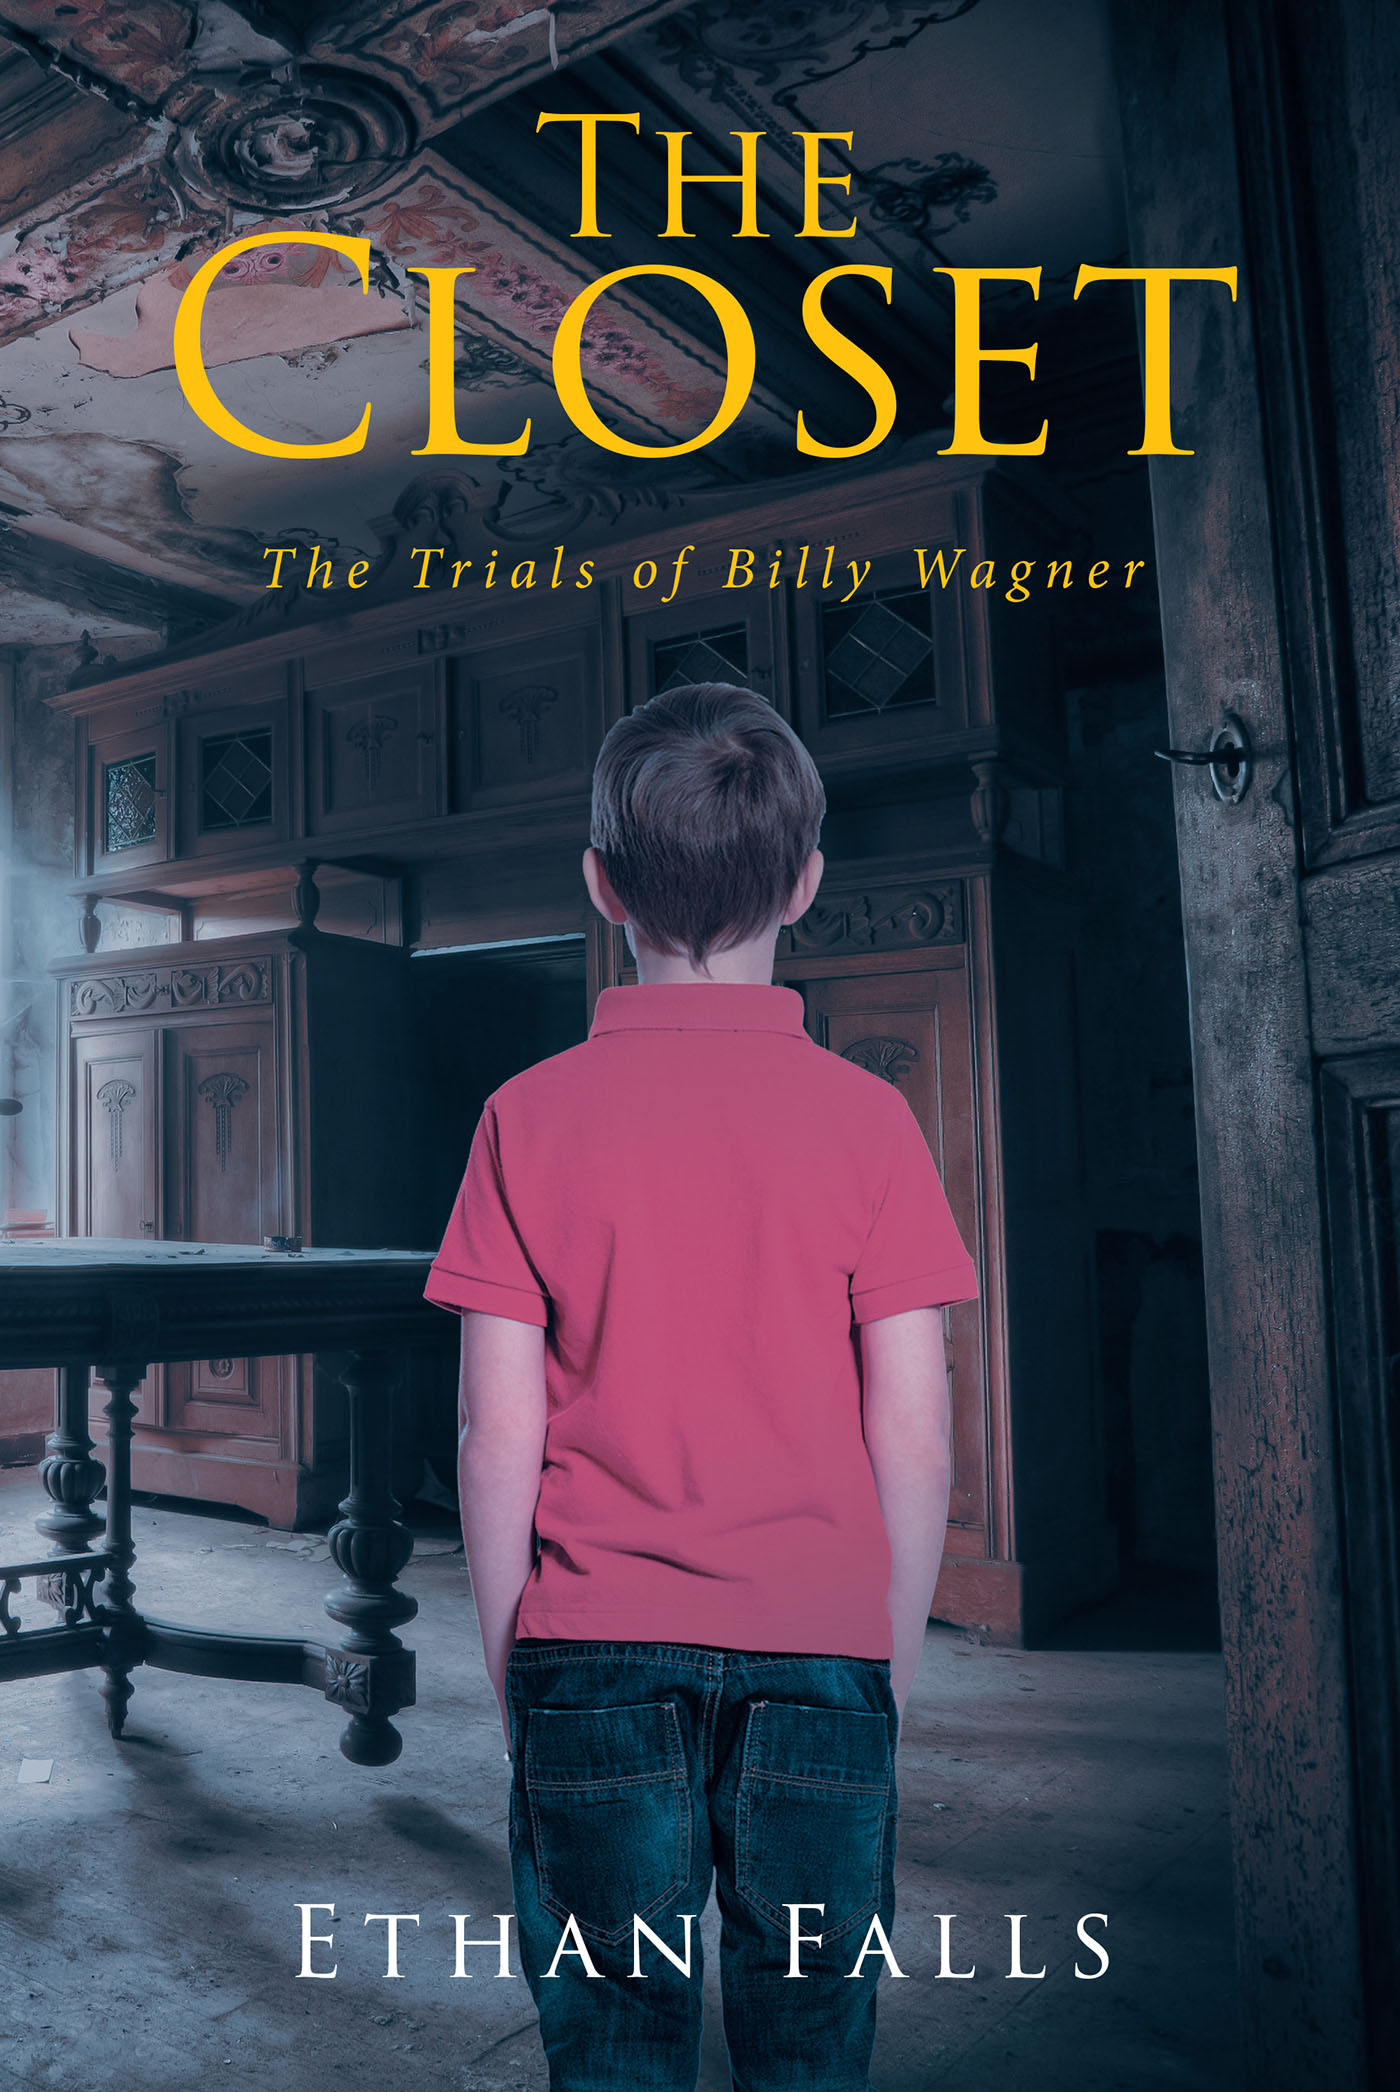 Ethan Falls’s New Book, "The Closet: The Trials of Billy Wagner," Follows a Young Man Who Attempts to Overcome His Fears and Endure Countless Challenges Within His Life